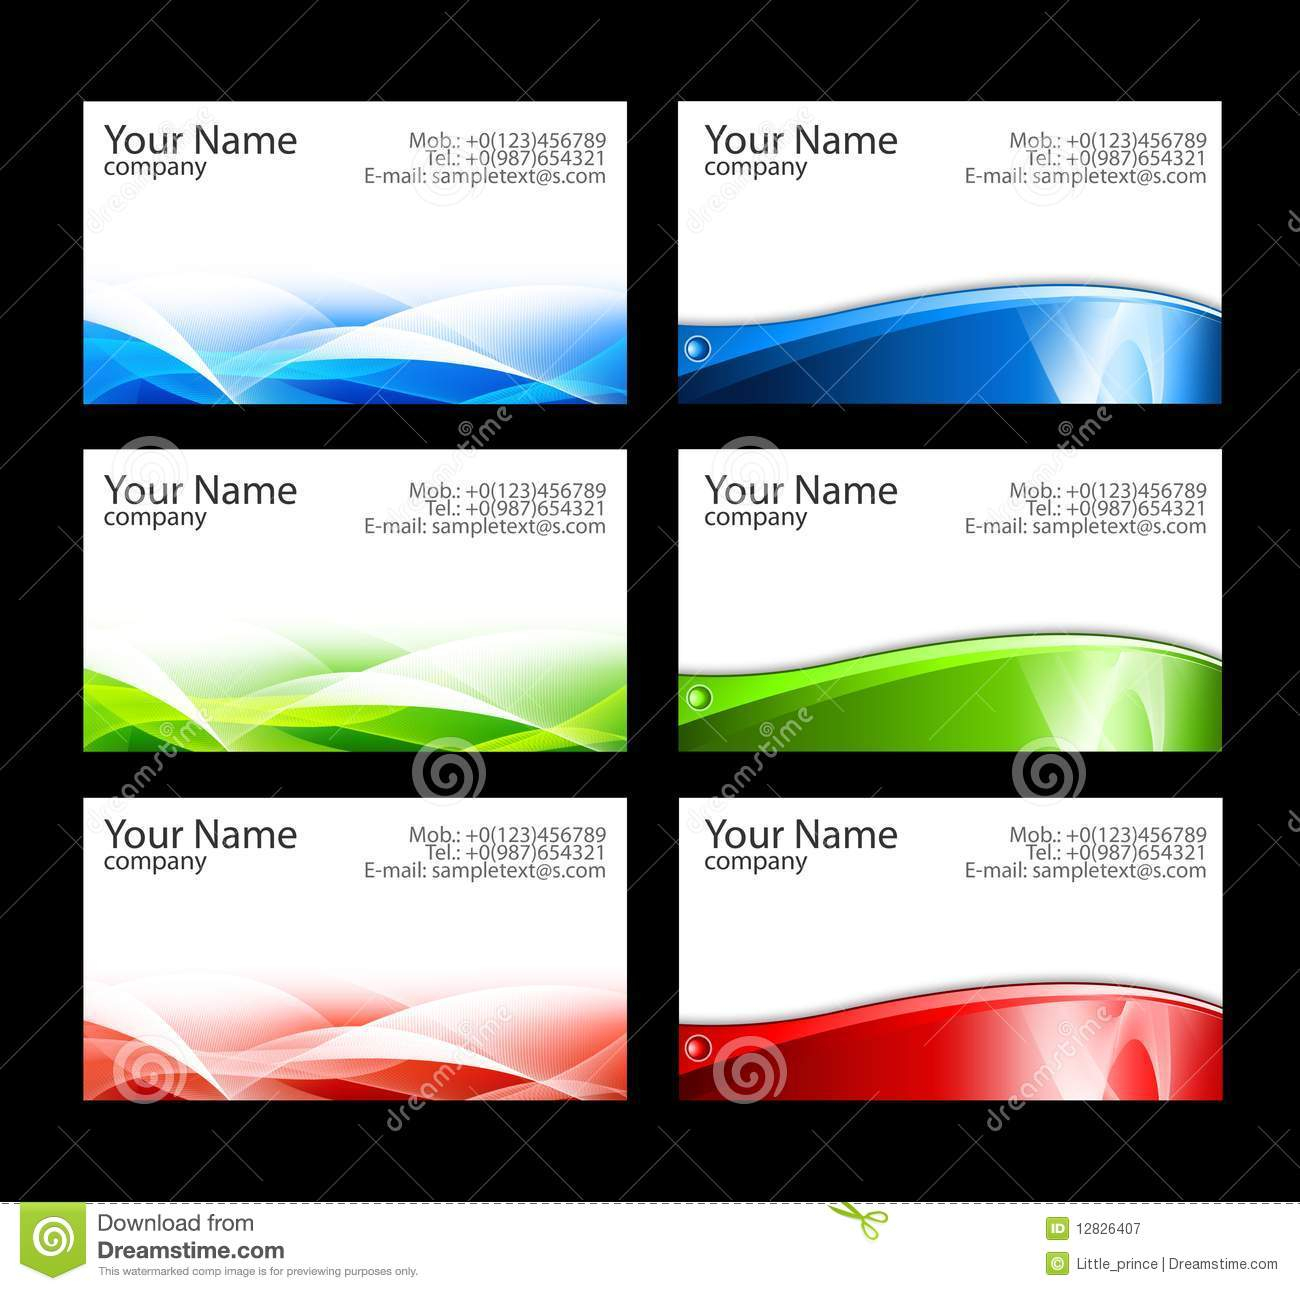 15 Free Avery Business Card Templates Images – Free Business With Regard To Free Business Cards Templates For Word